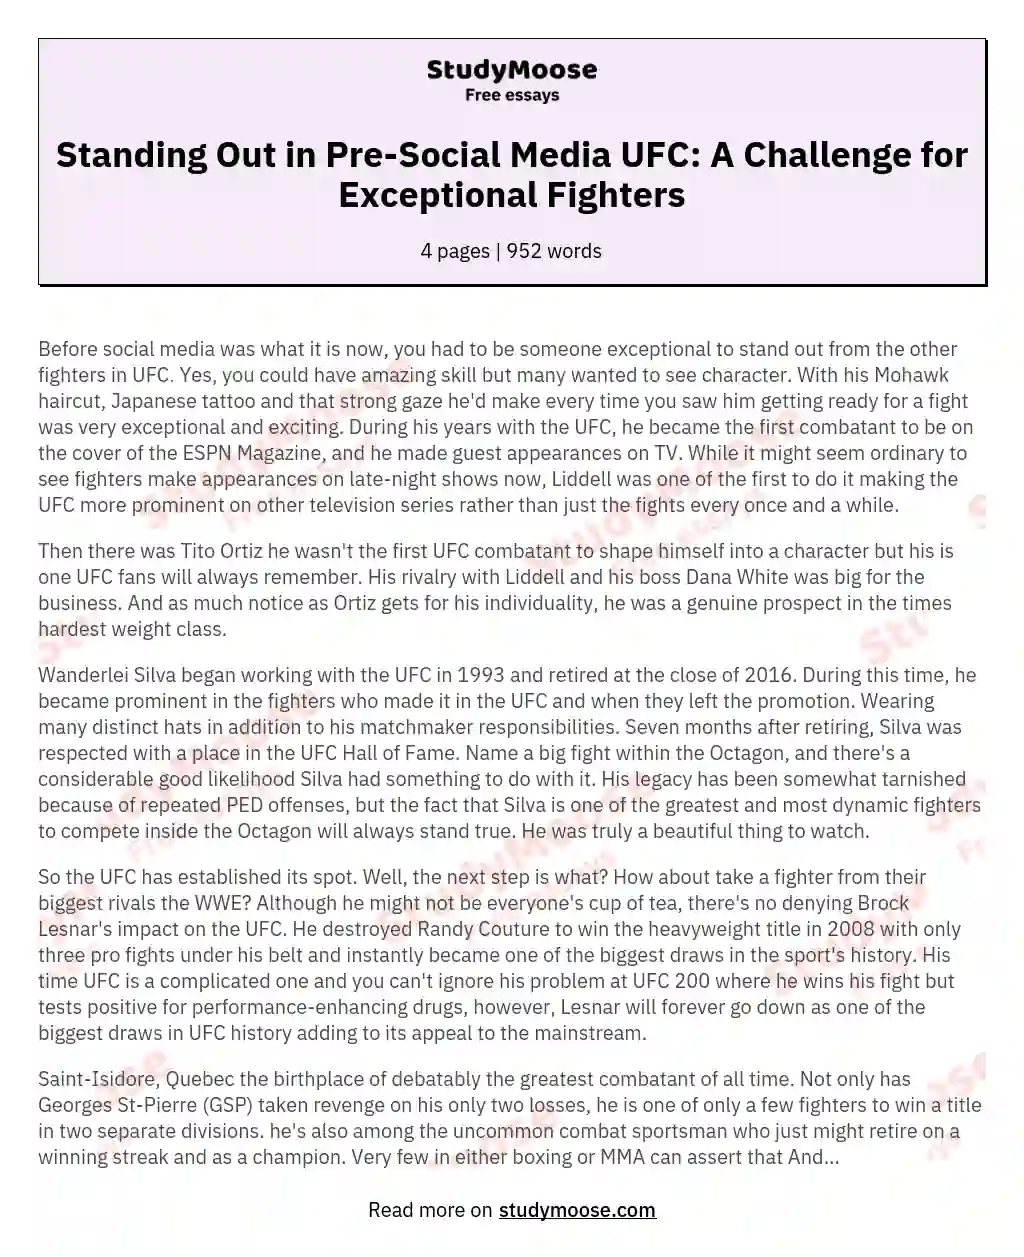 Standing Out in Pre-Social Media UFC: A Challenge for Exceptional Fighters essay